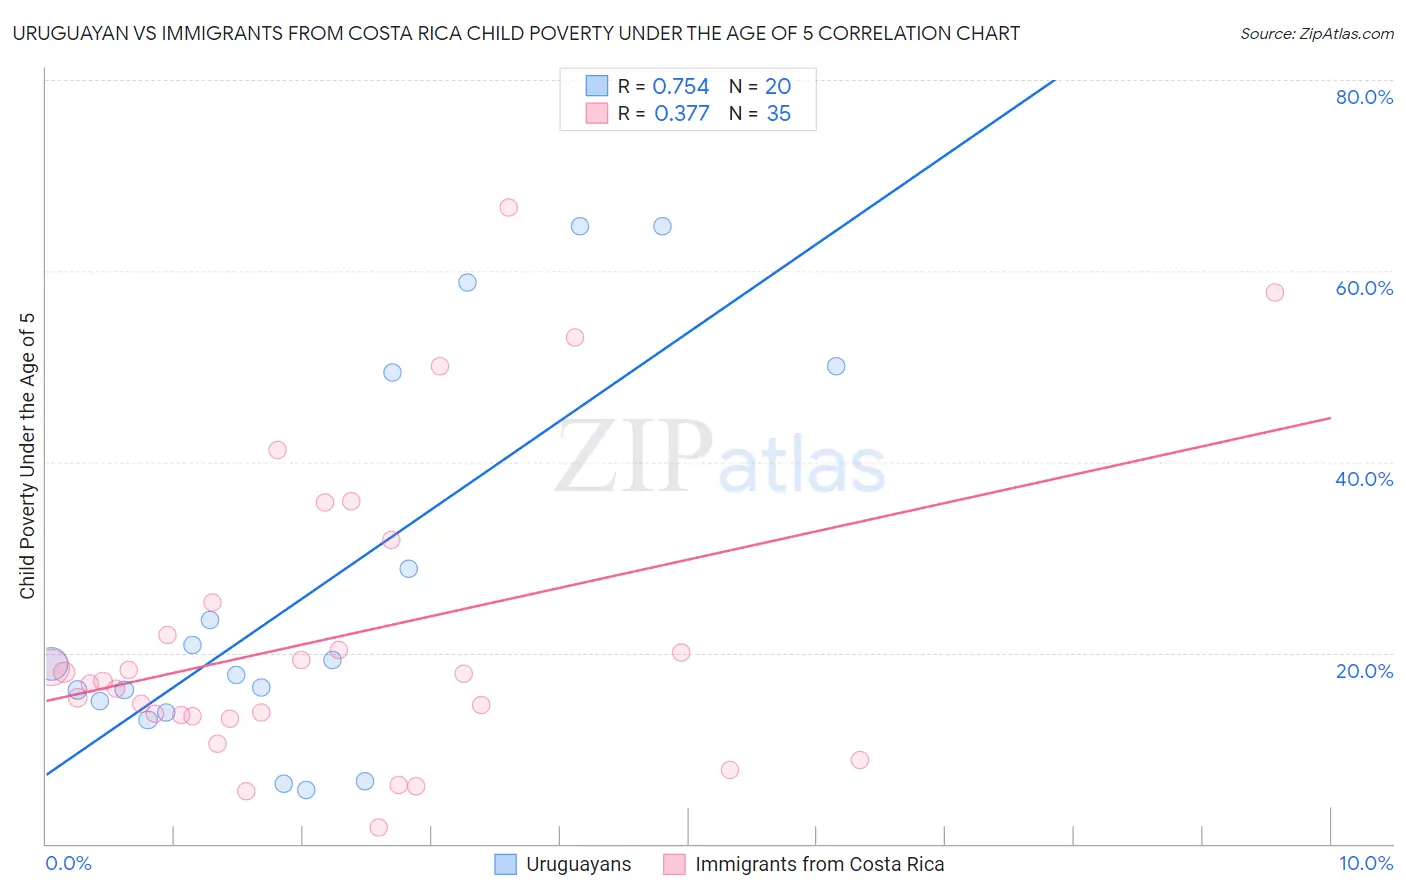 Uruguayan vs Immigrants from Costa Rica Child Poverty Under the Age of 5